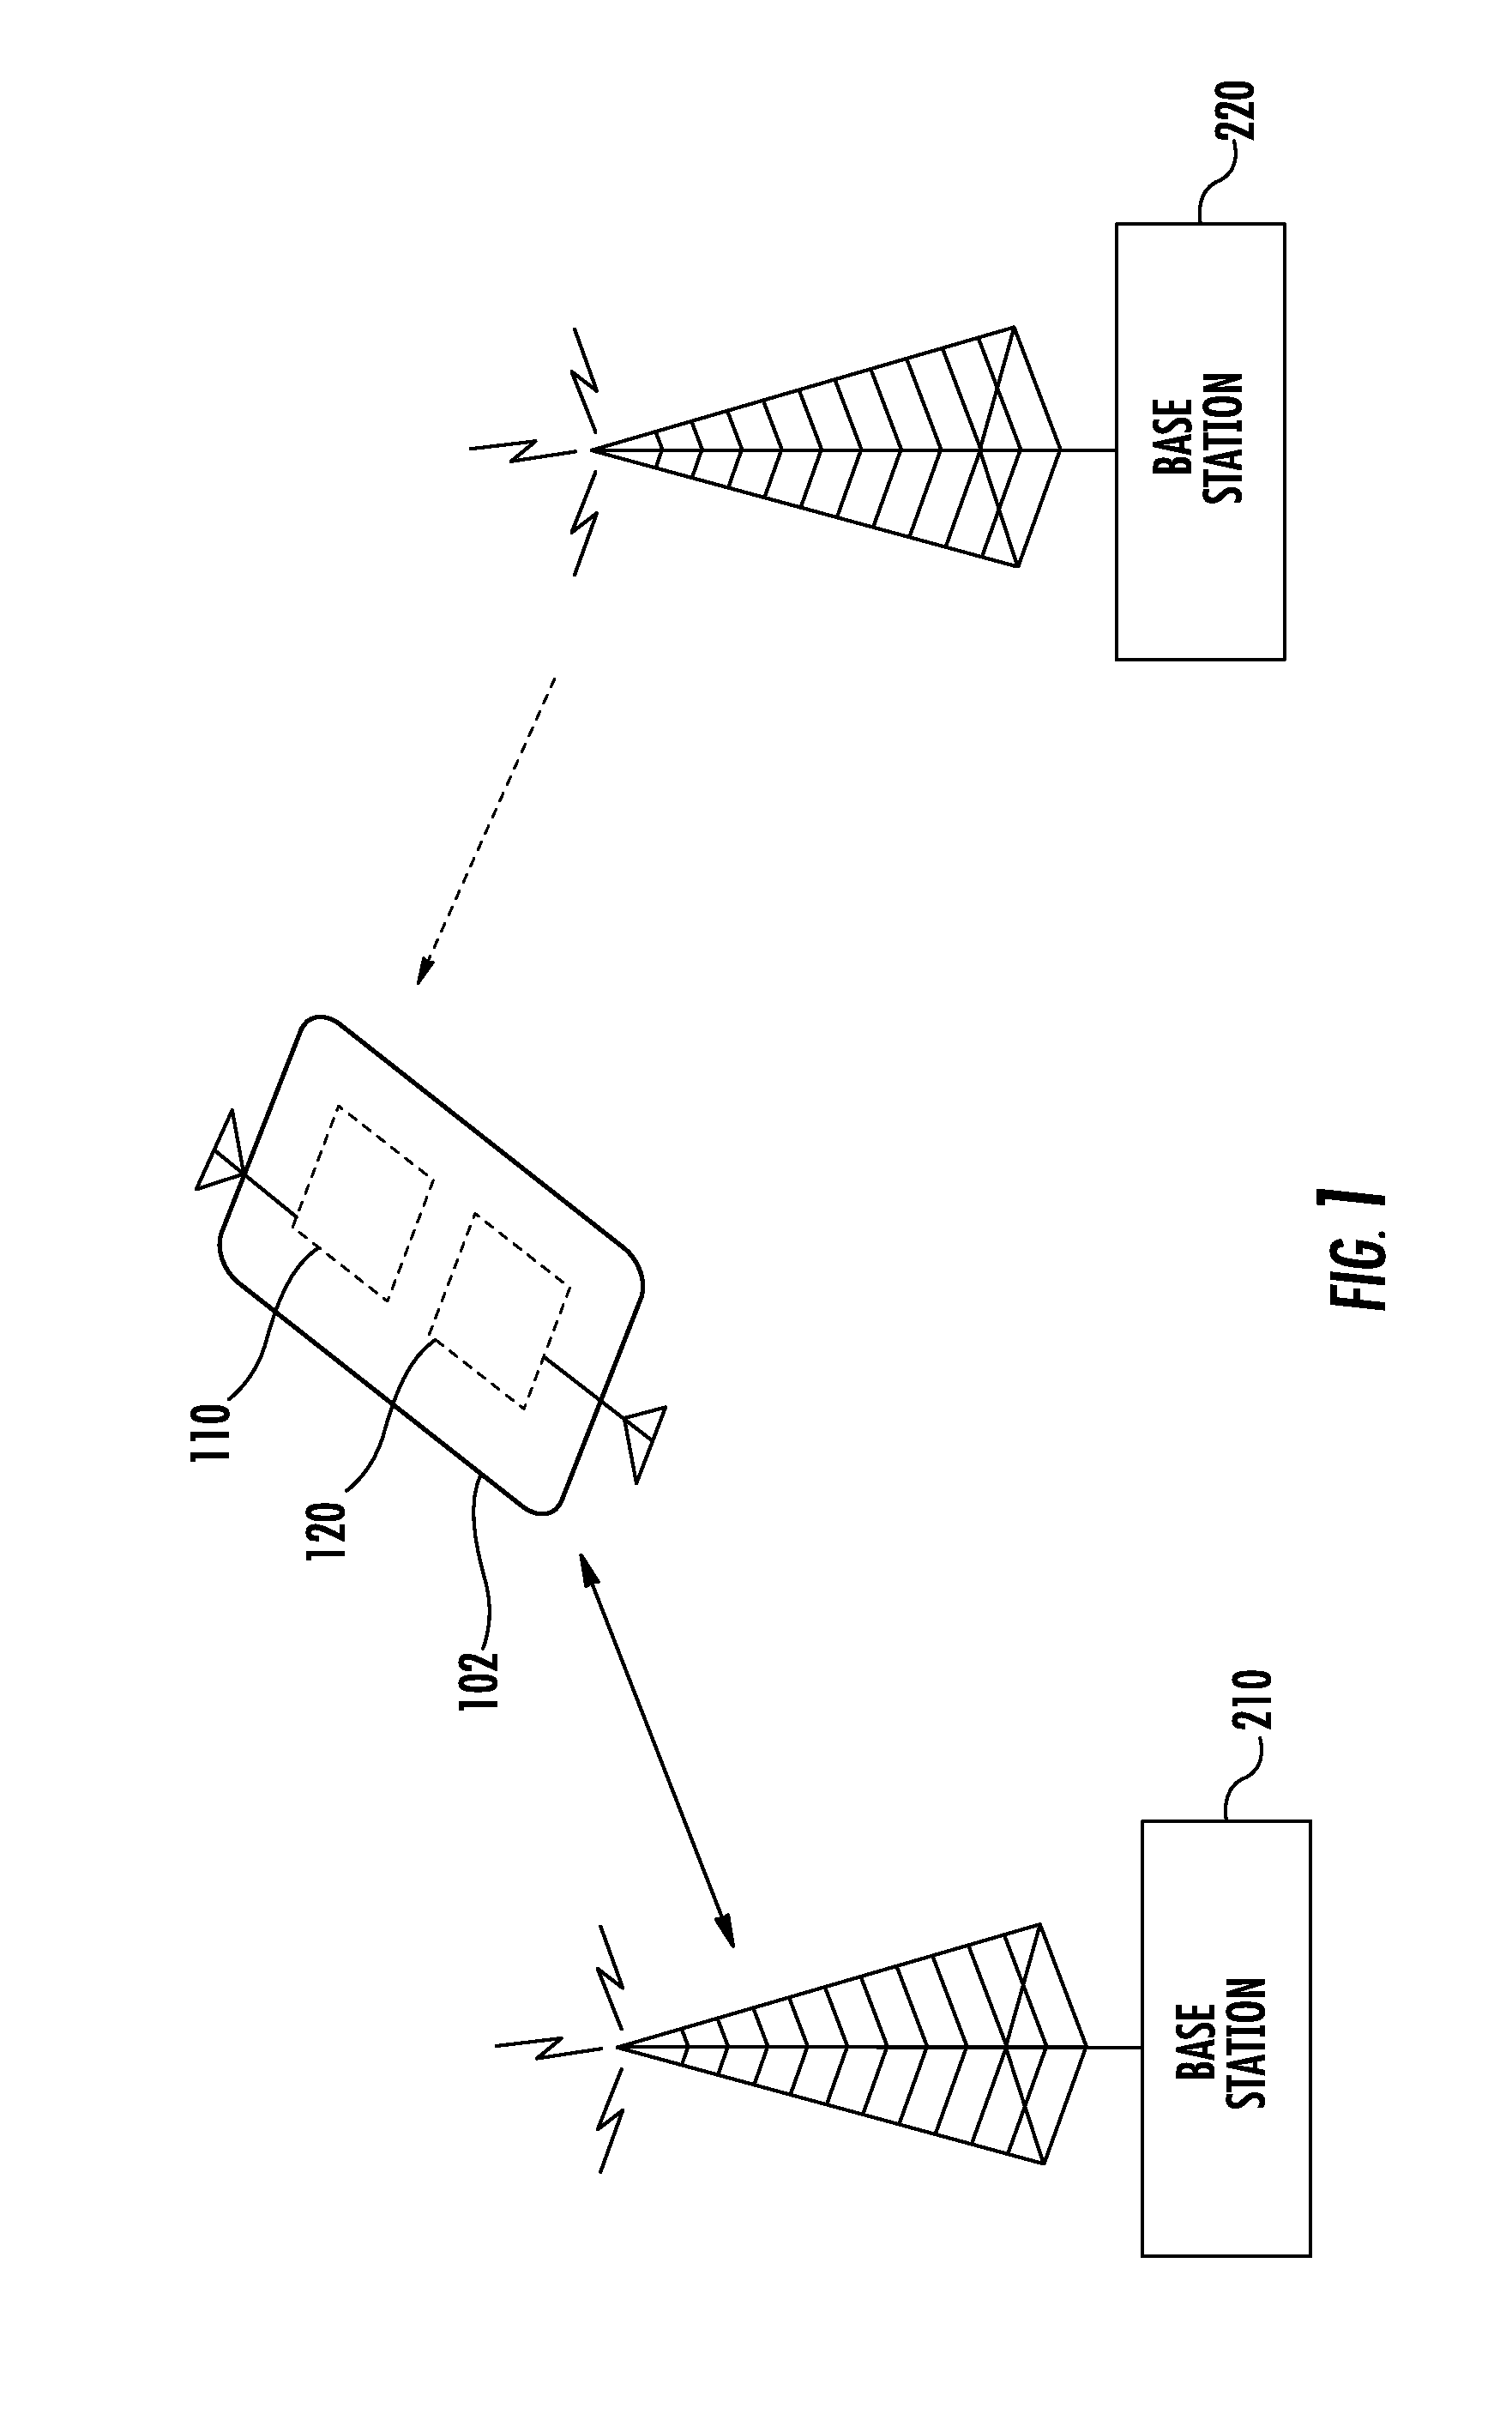 Apparatus, systems and methods for discontinuous signaling in a mobile communication network